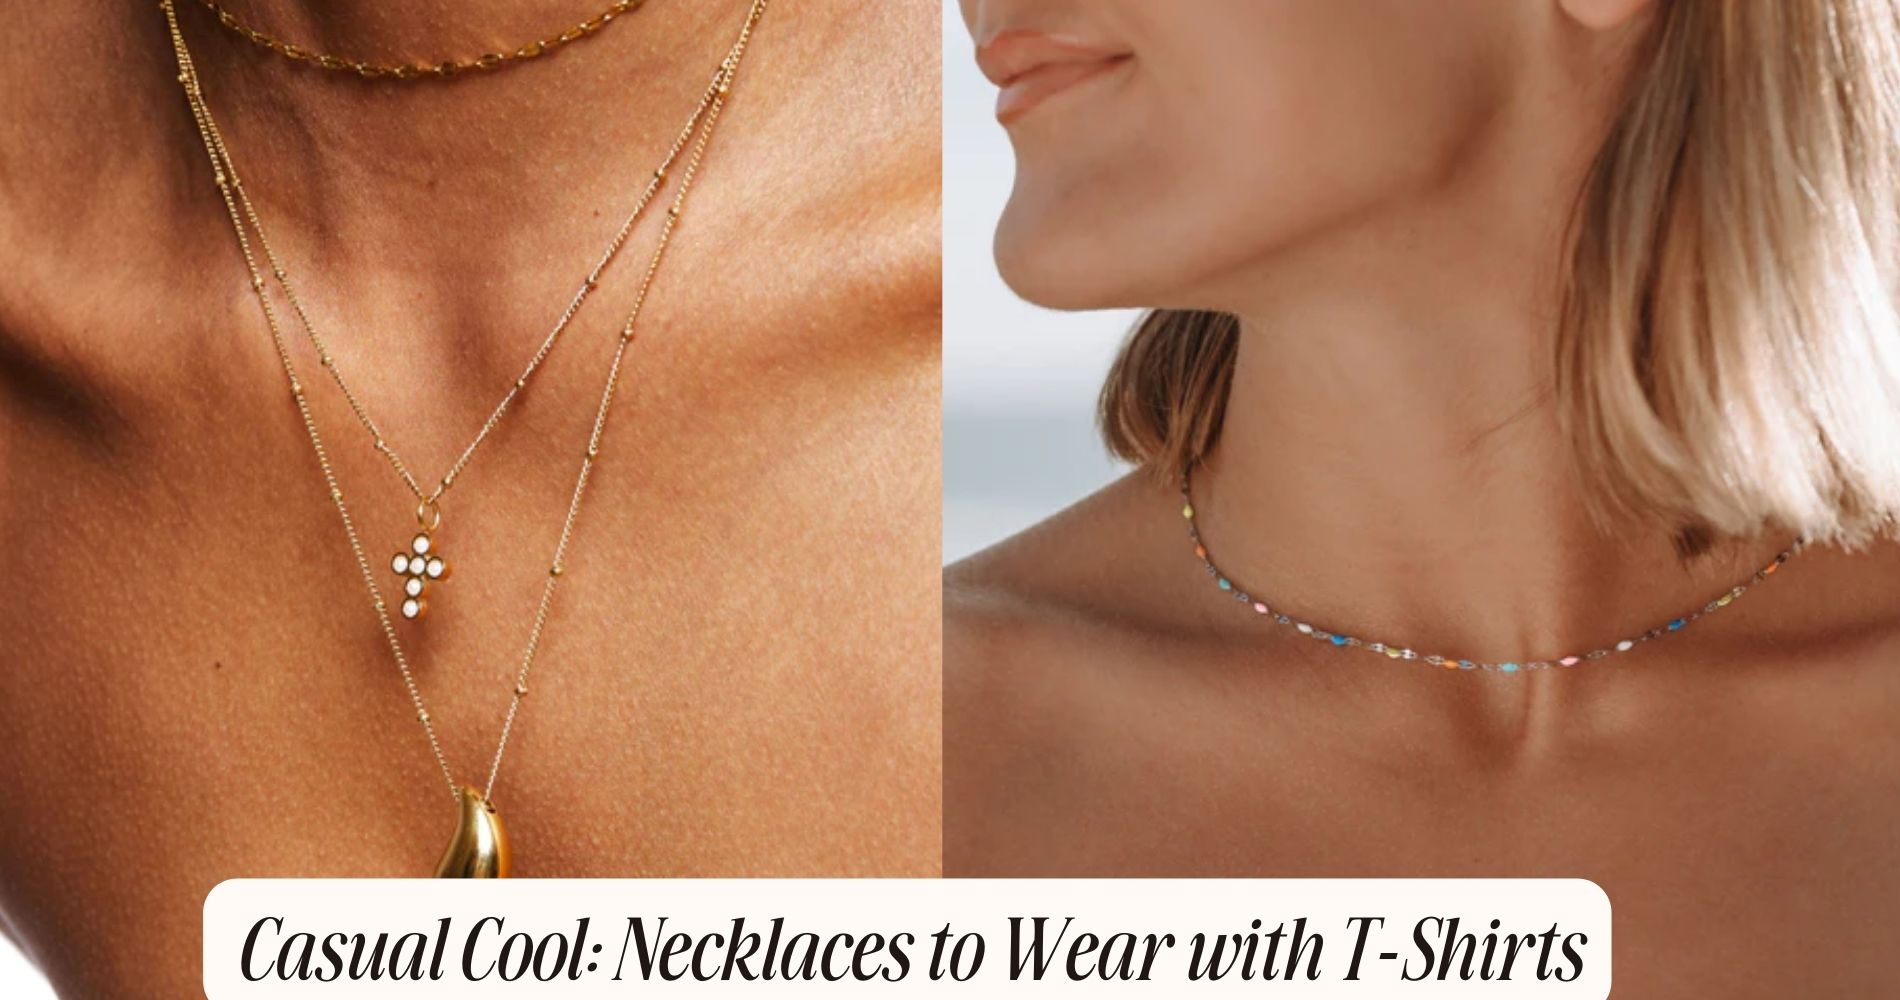 necklaces to wear with t shirts